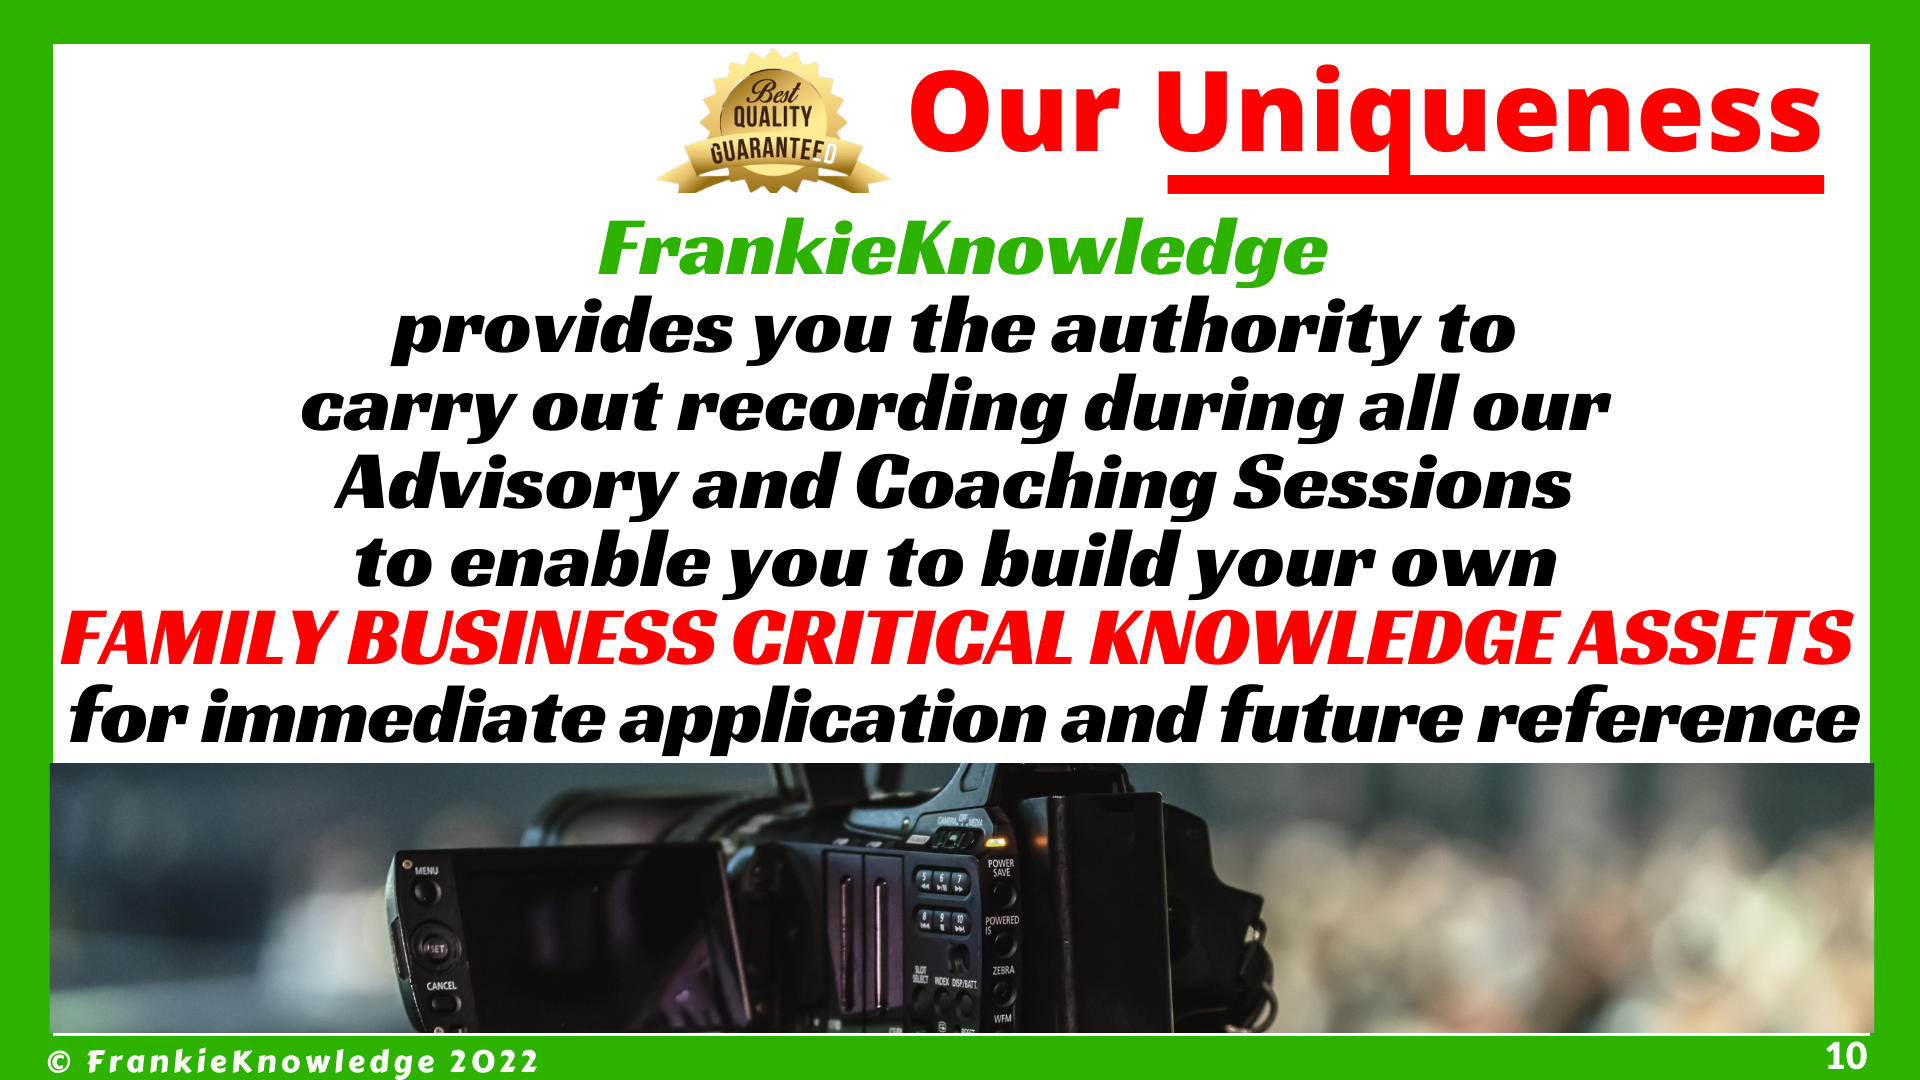 FrankieKnowledge provides you the authority to  carry out recording during all our  Advisory and Coaching Sessions  to enable you to build your own  Family Business CrITICAL Knowledge Assets  for immediate application and future reference